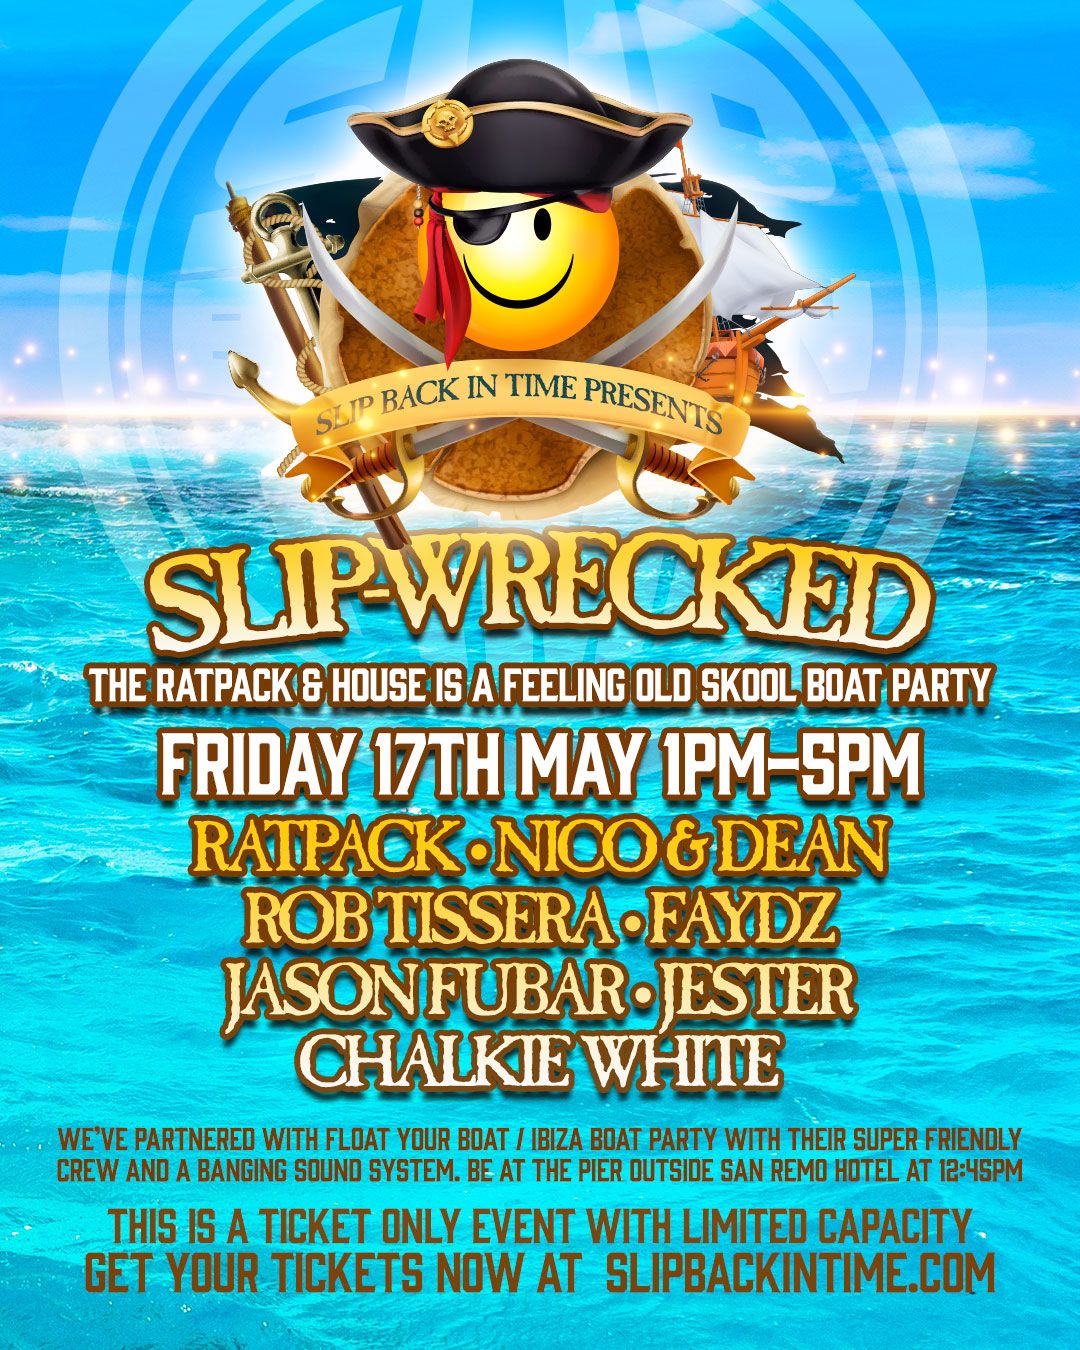 Slip Back In Time presents  \u2018THE SLIP-WRECKED BOAT PARTY\u2019 - SOLD OUT!